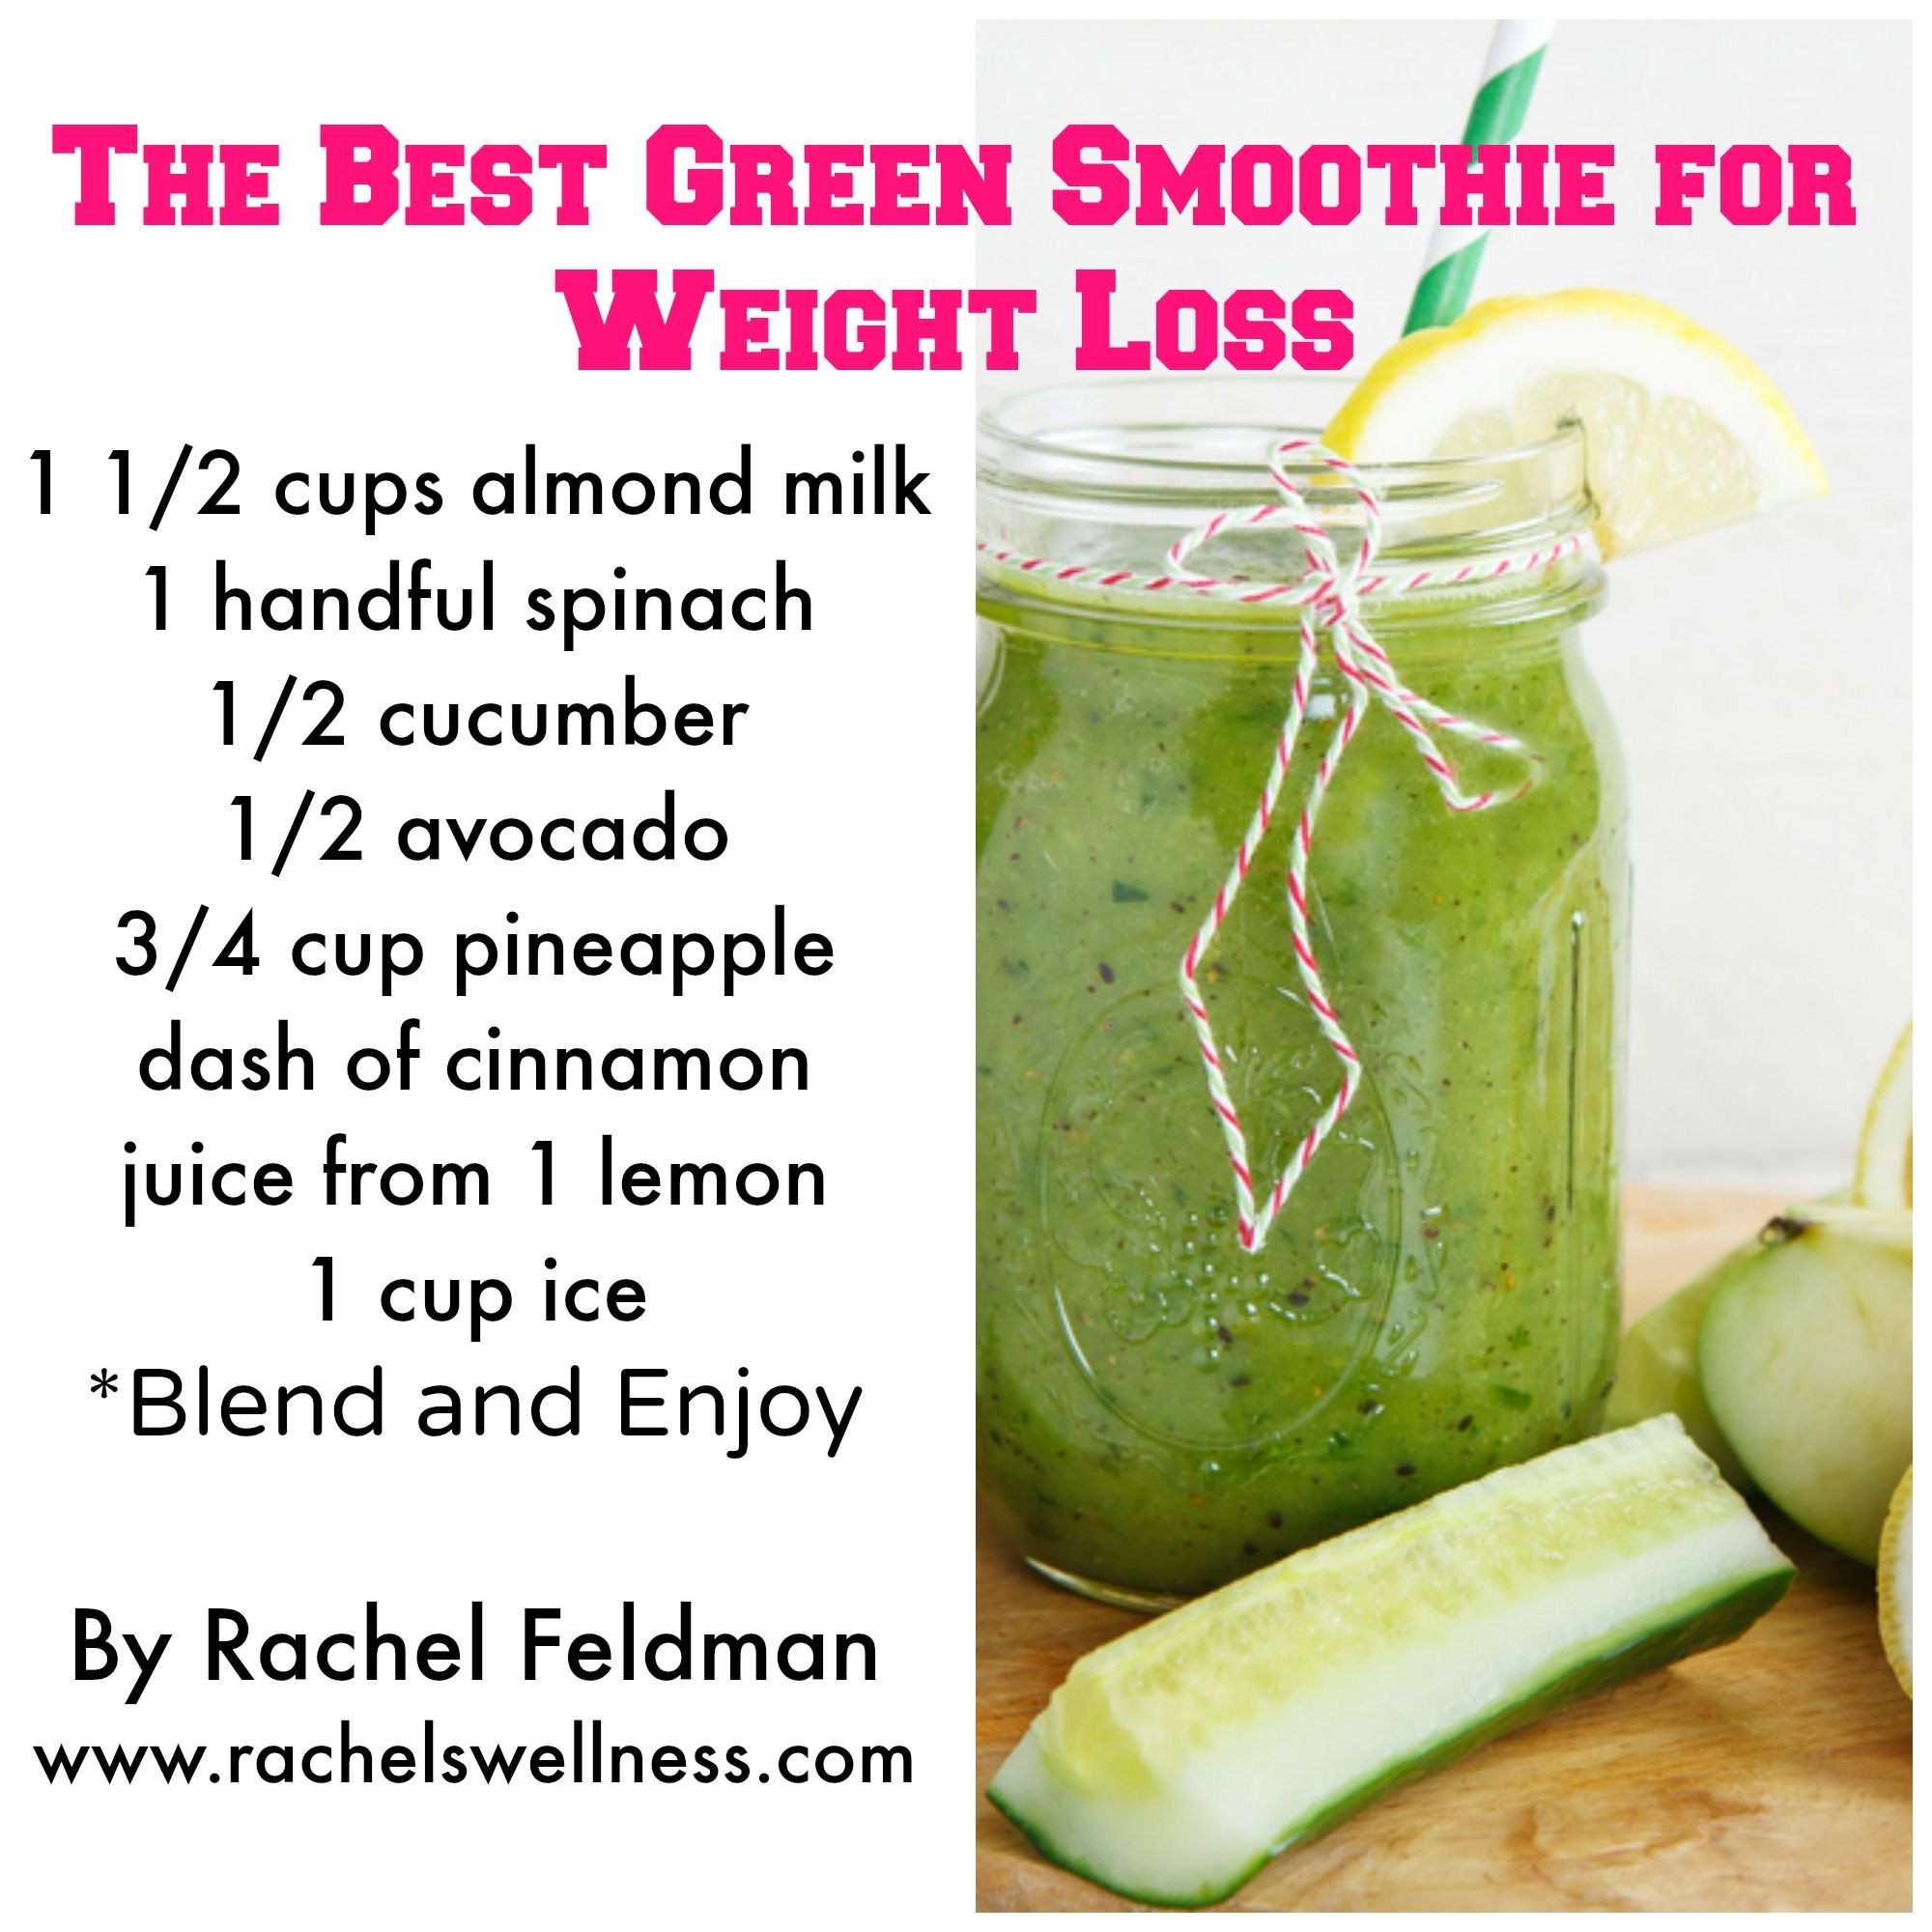 Dinner Smoothies For Weight Loss
 7 Healthy Green Smoothie Recipes For Weight Loss